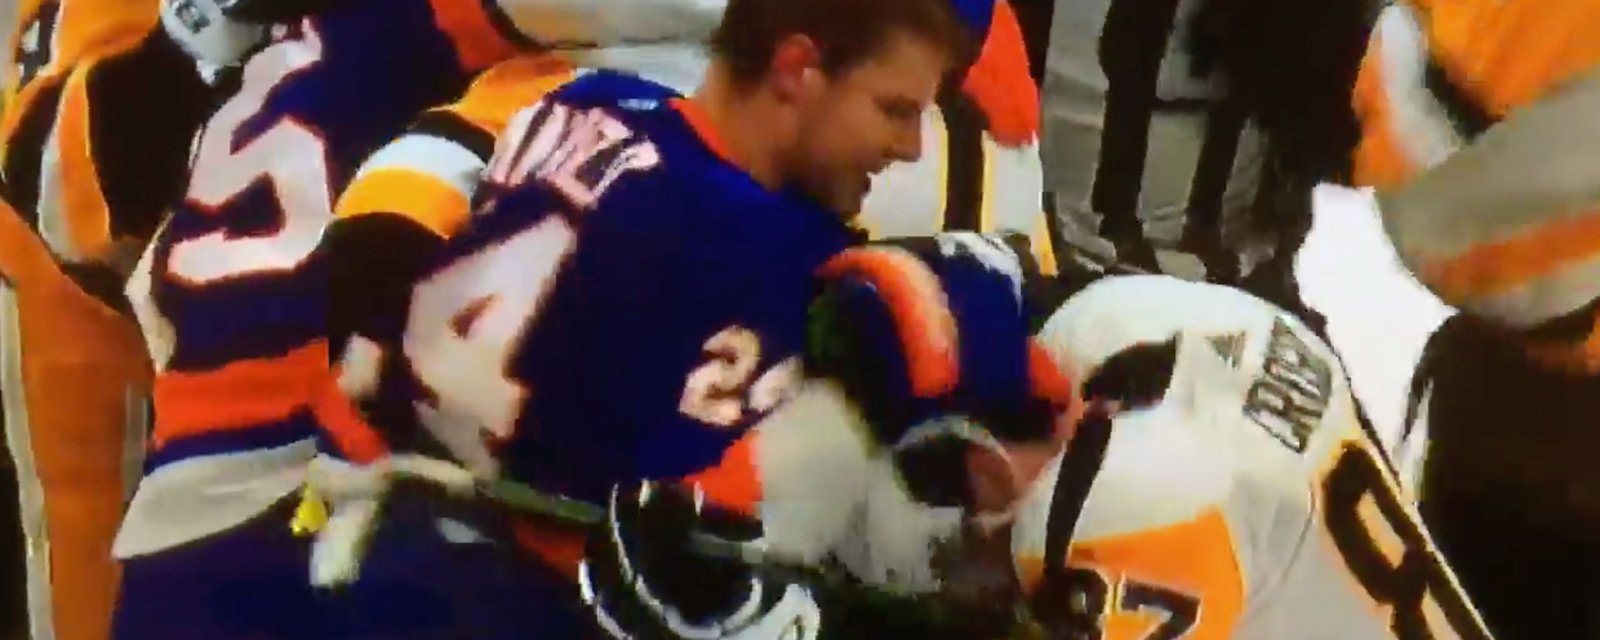 Game 2 between Isles and Pens ends up in full line brawl with Crosby in the middle of it! 